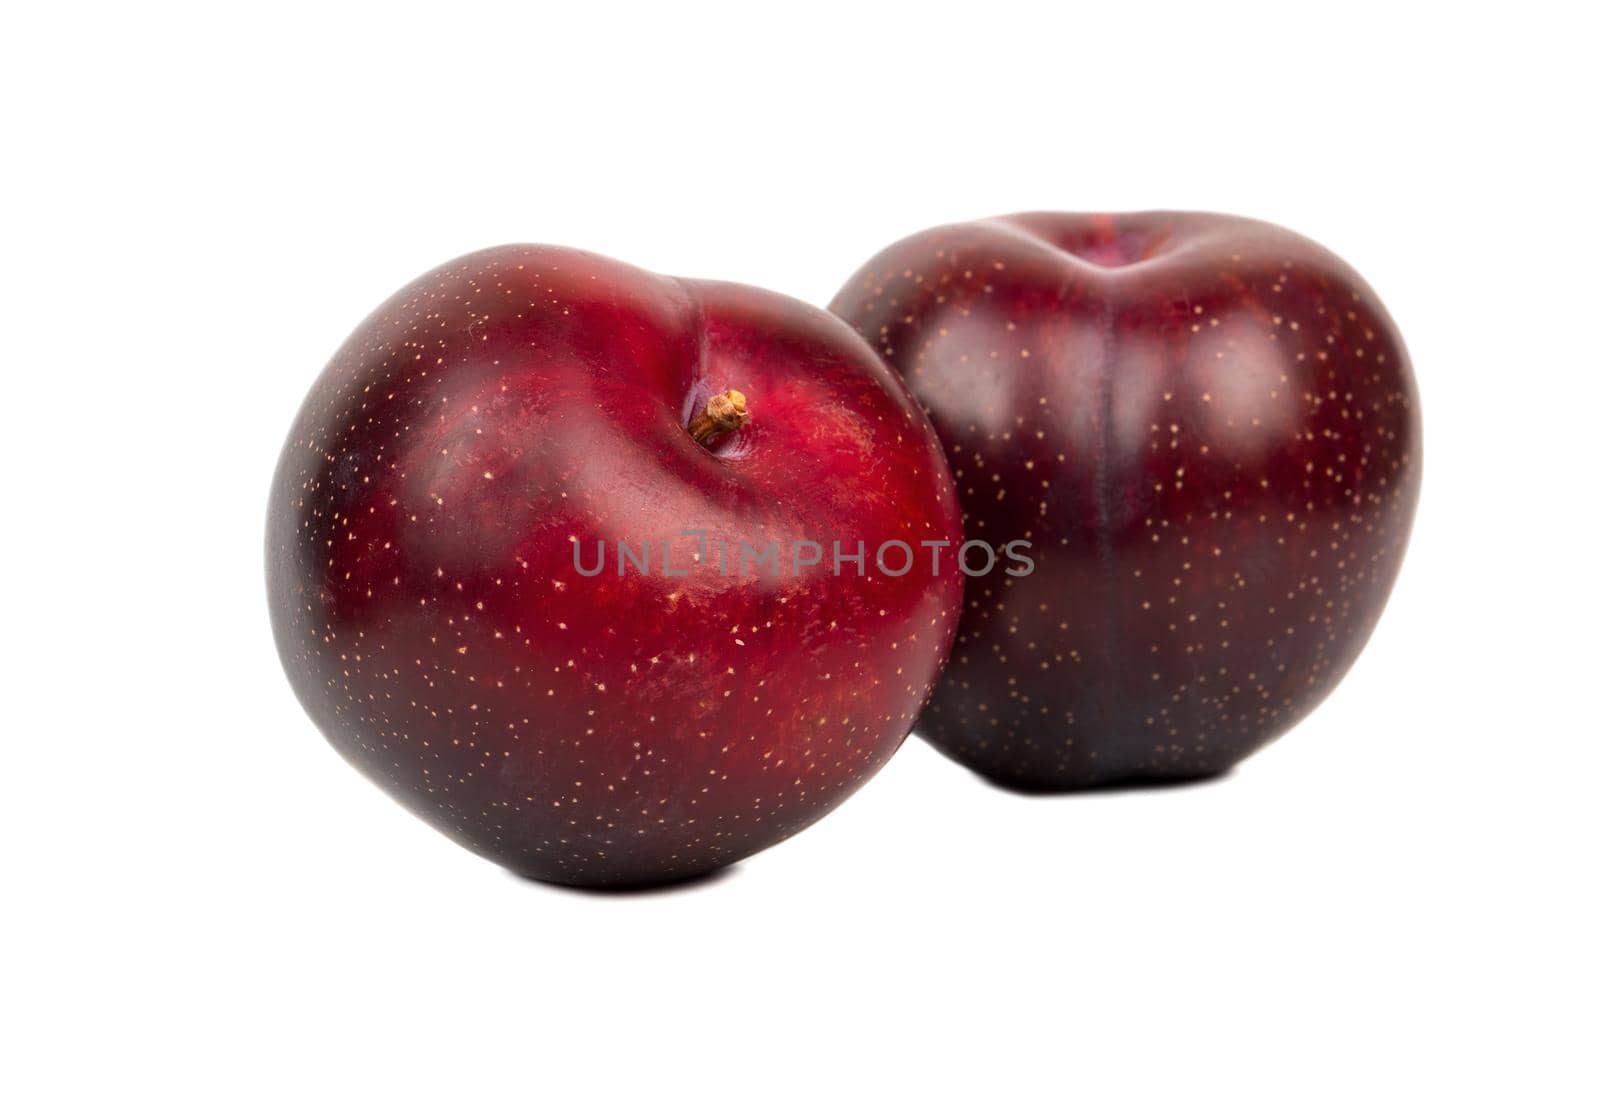 Two ripe big red plums isolated on white background